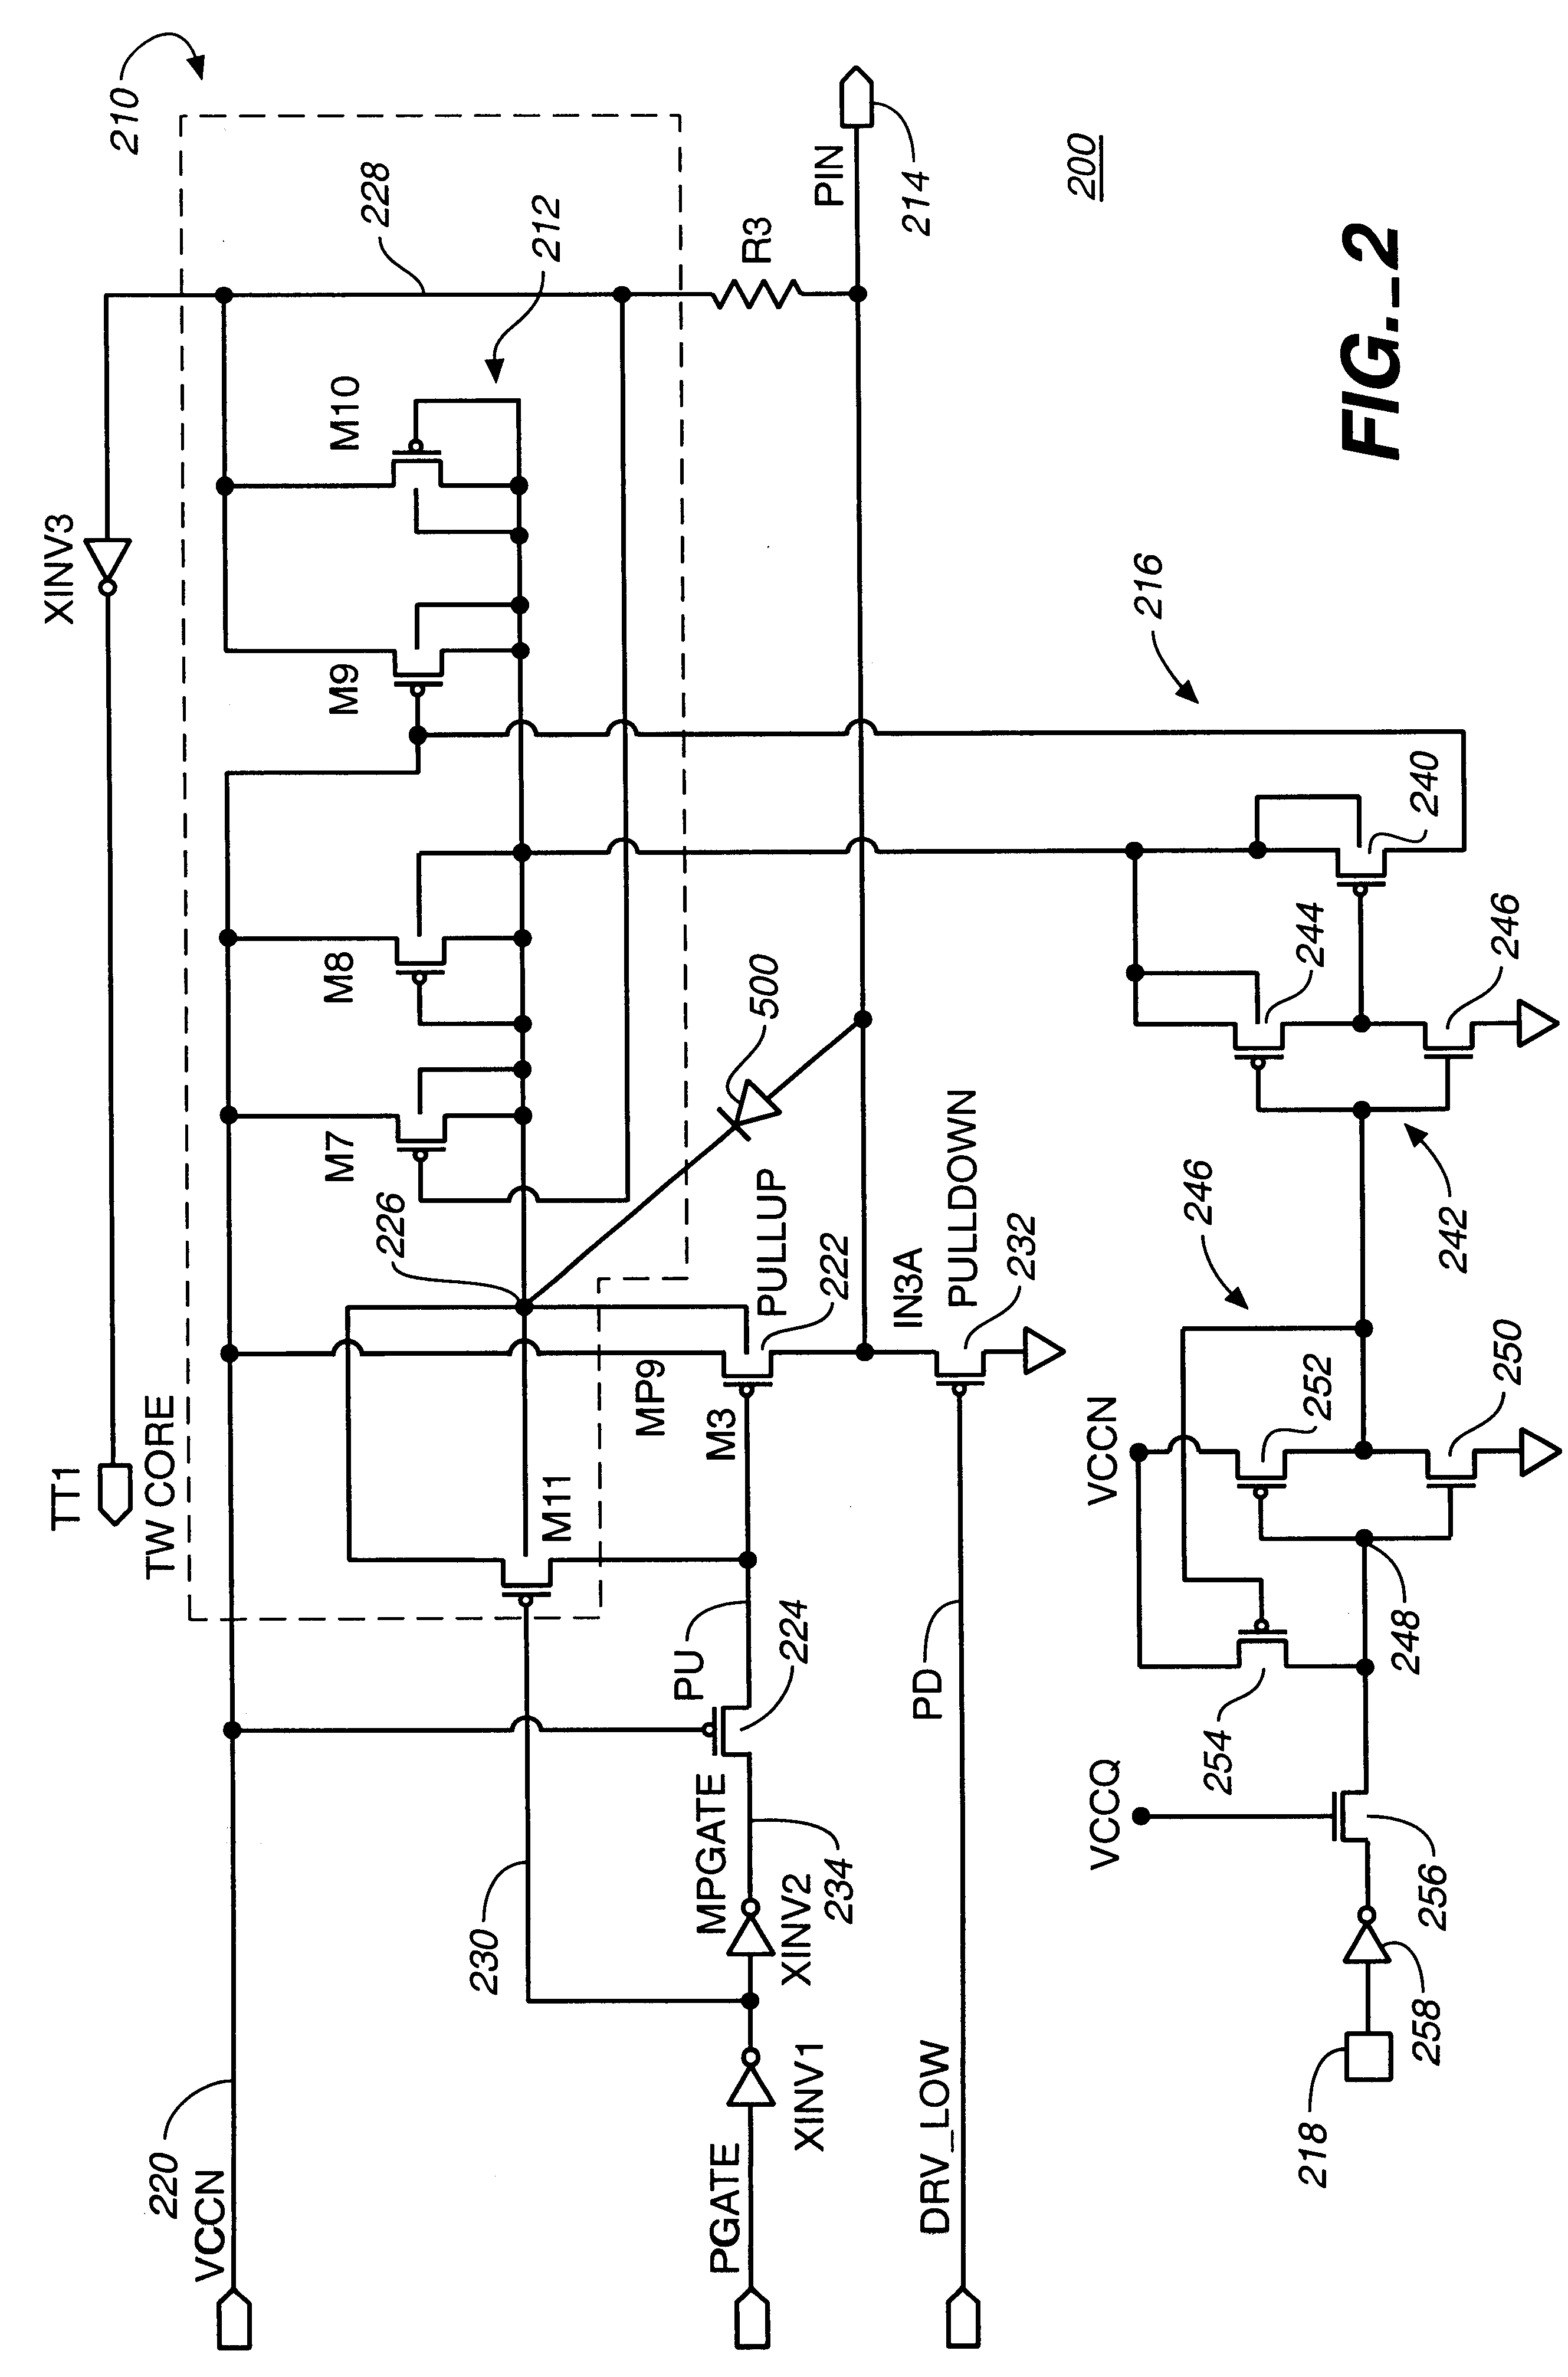 Integrated circuit with both clamp protection and high impedance protection from input overshoot